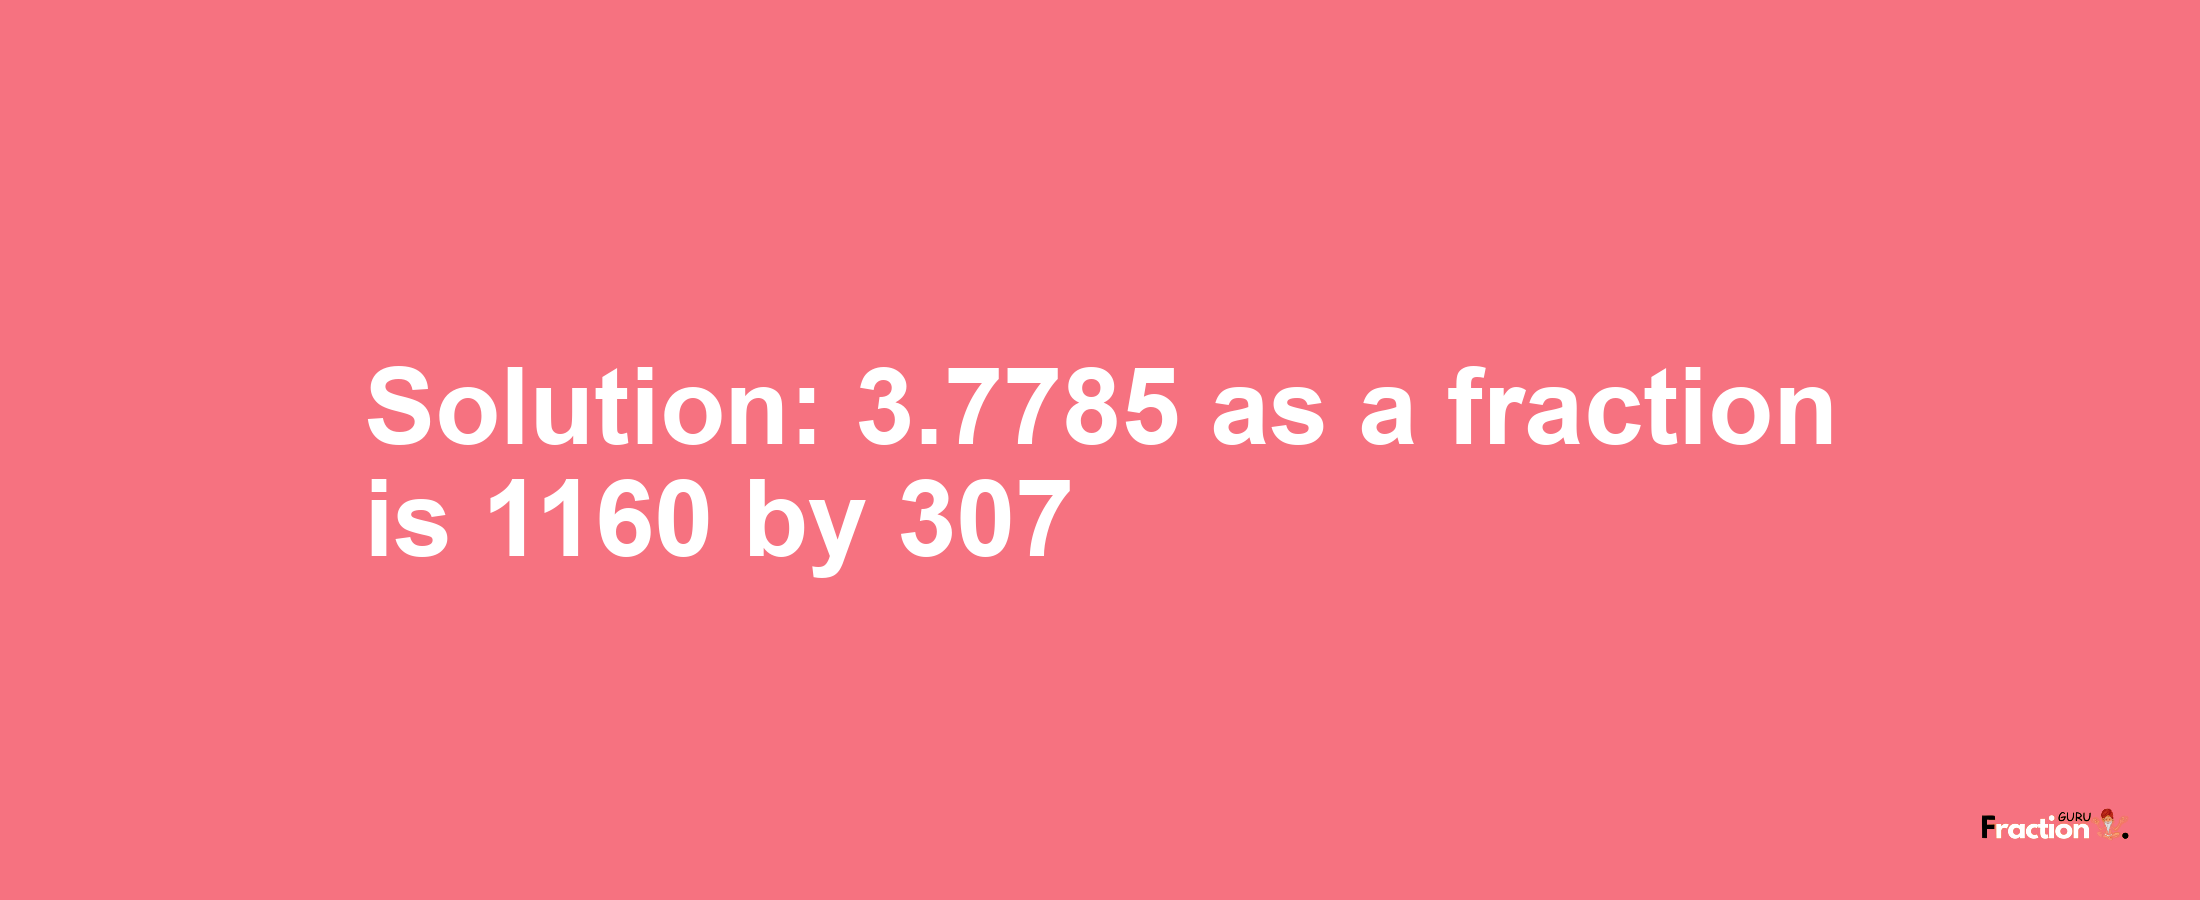 Solution:3.7785 as a fraction is 1160/307